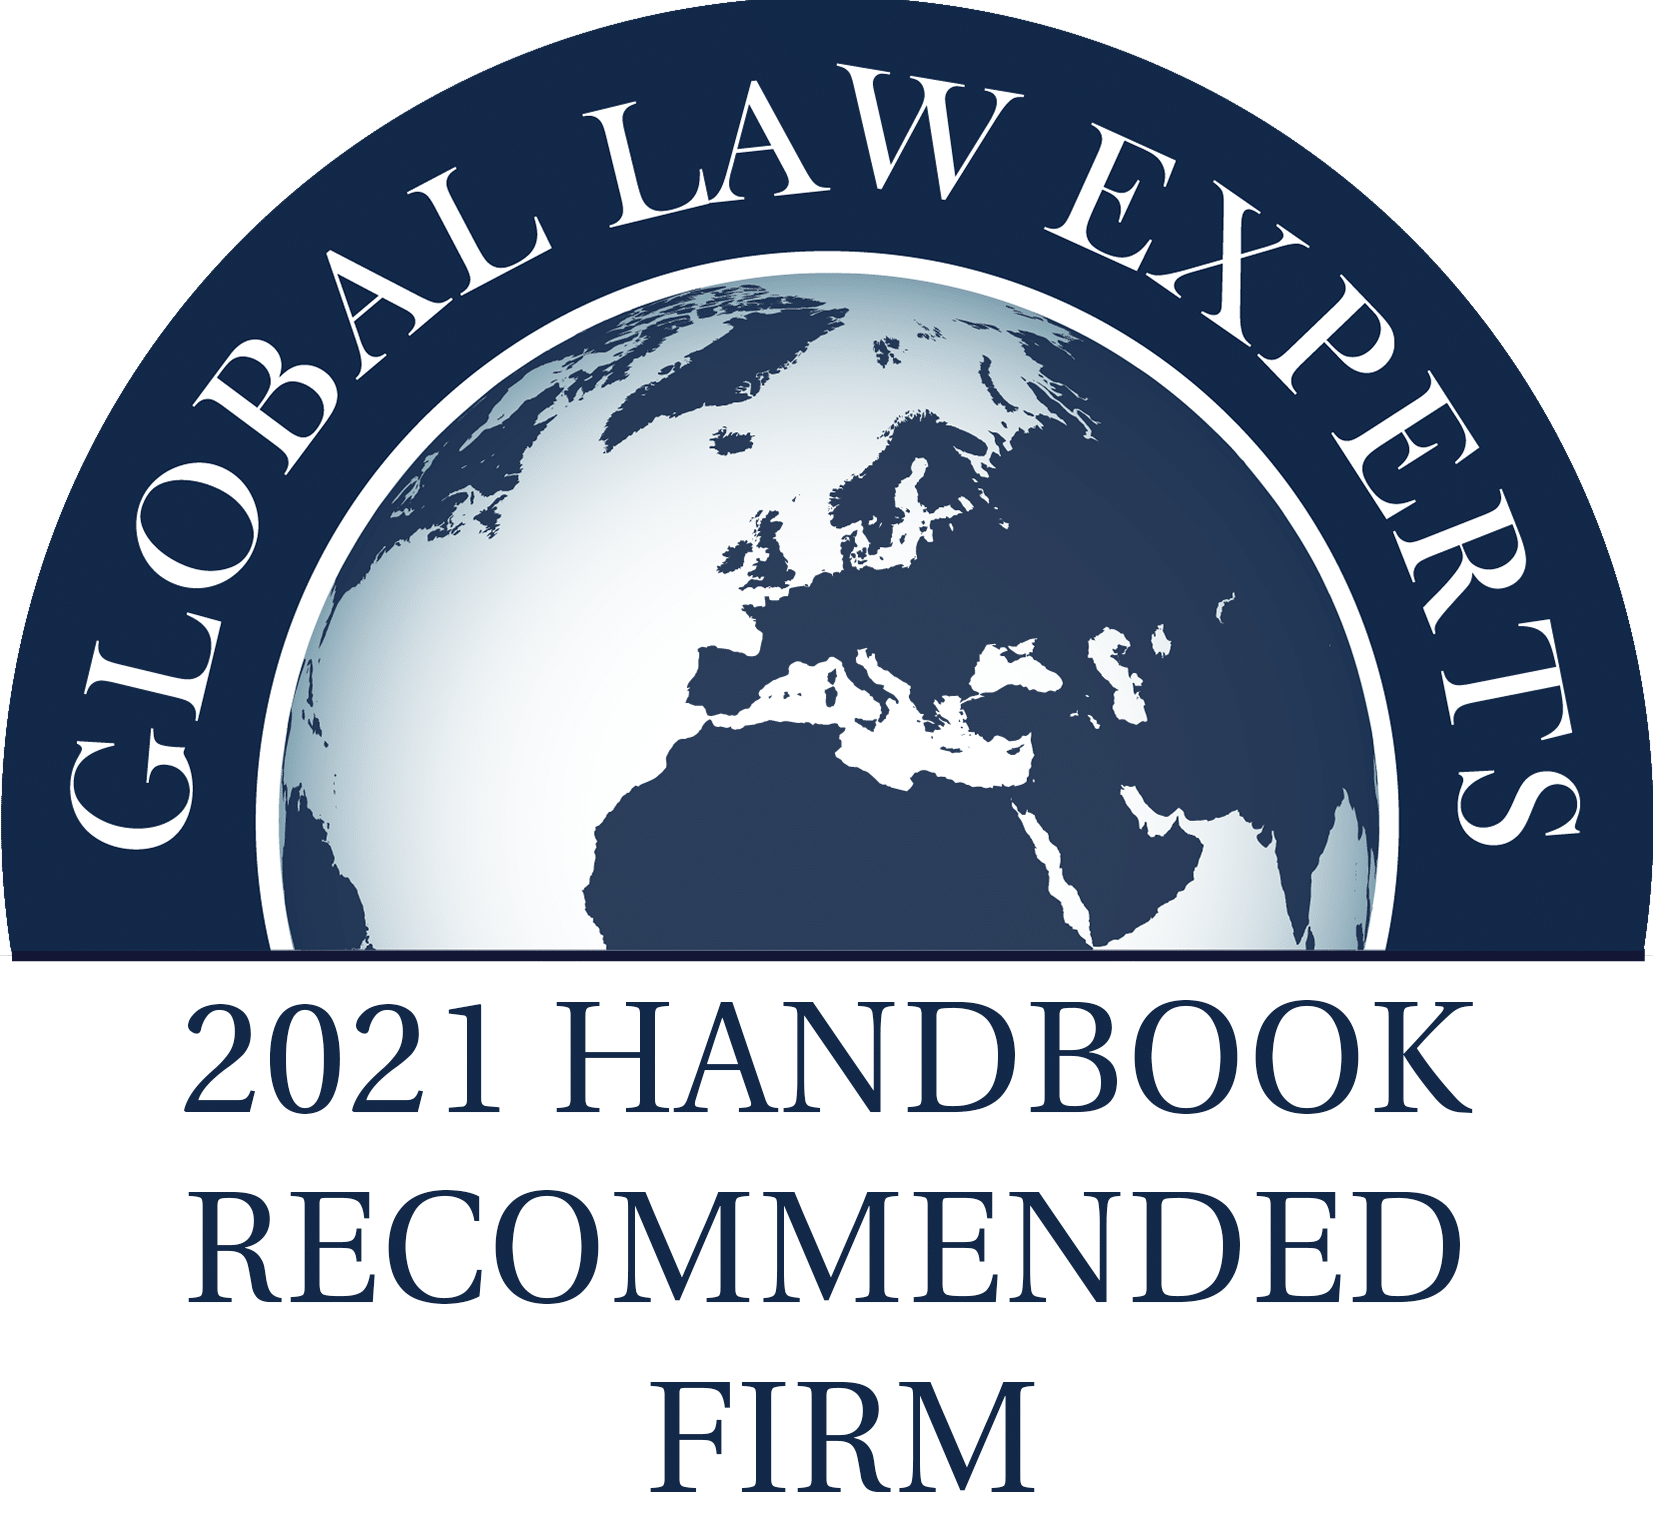 GLE Handbook 2021 Recommended Firm